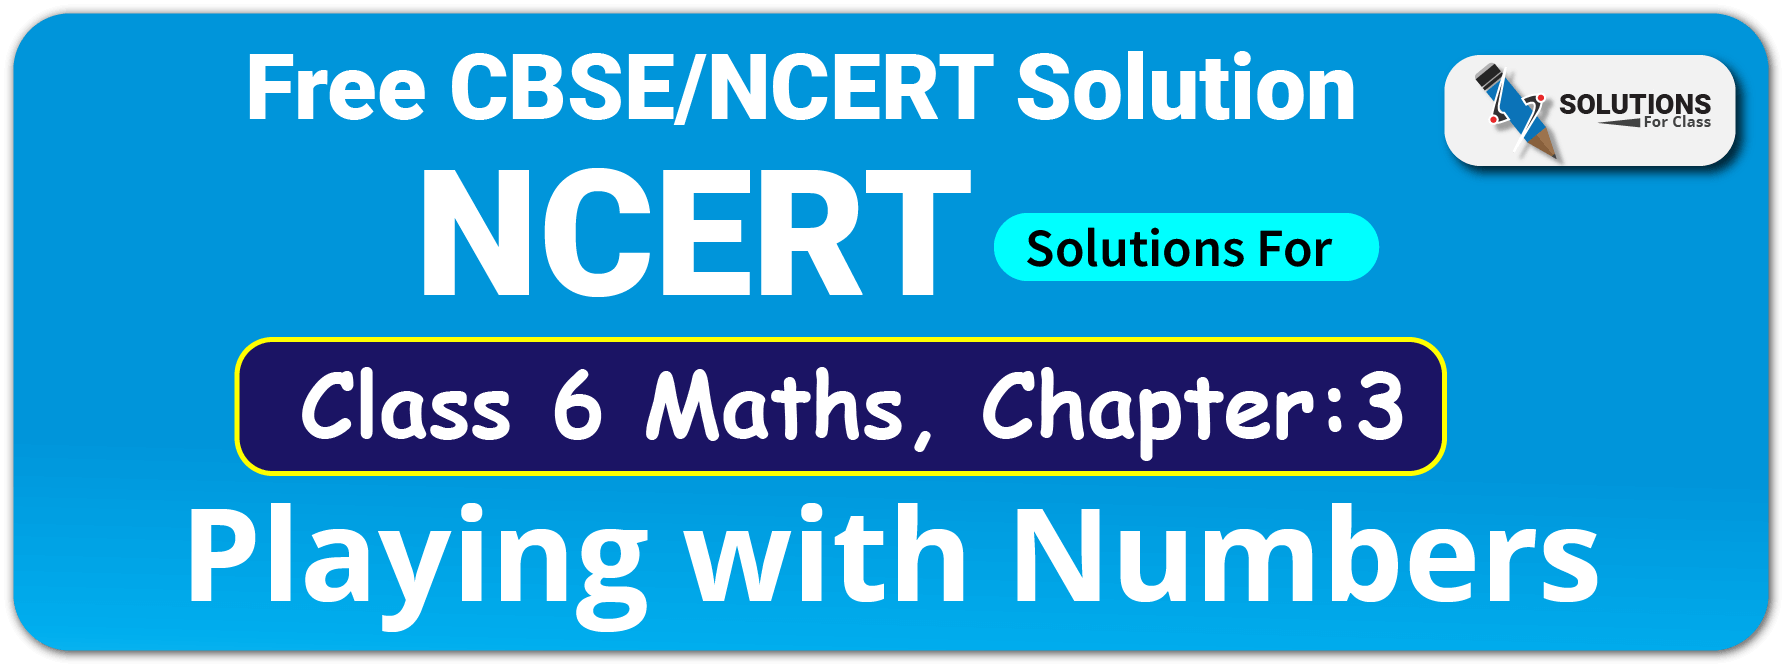 NCERT Solutions Class 6 Maths Chapter 3 Playing with Numbers